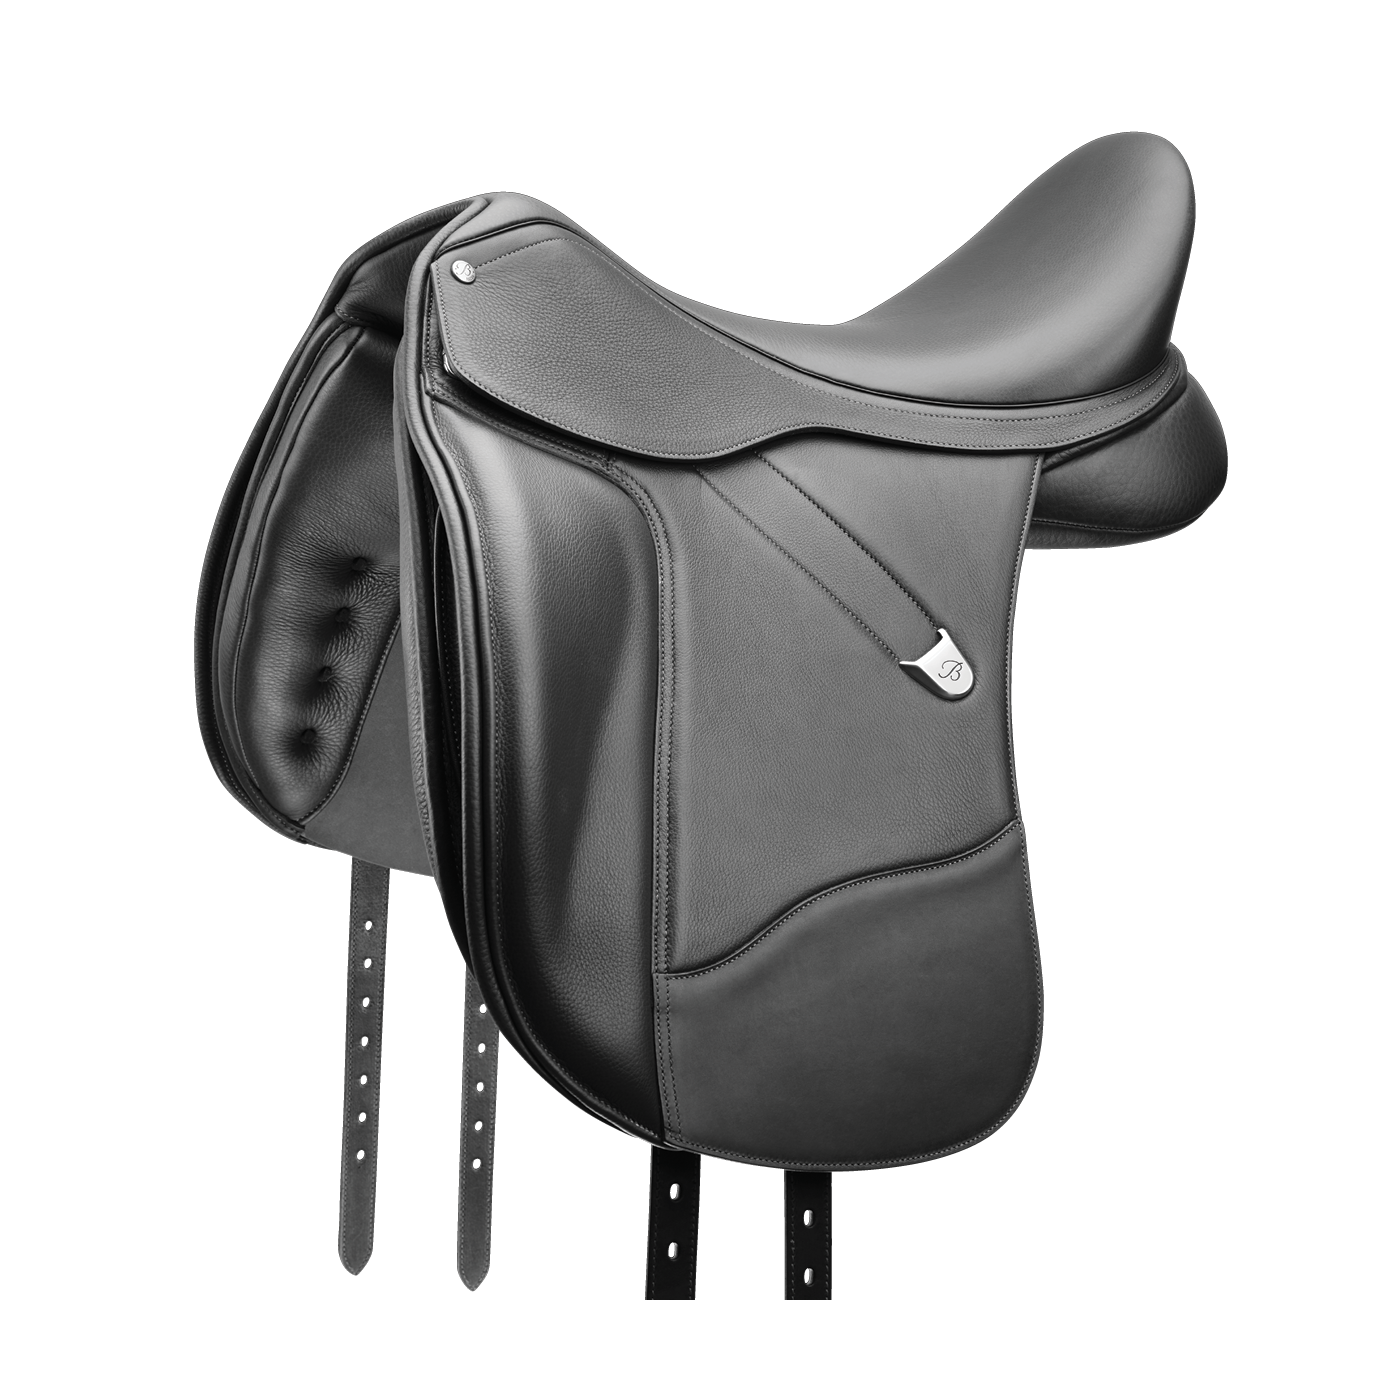 Bates Dressage in Classic Black Opulence Leather (DISPLAY MODEL)